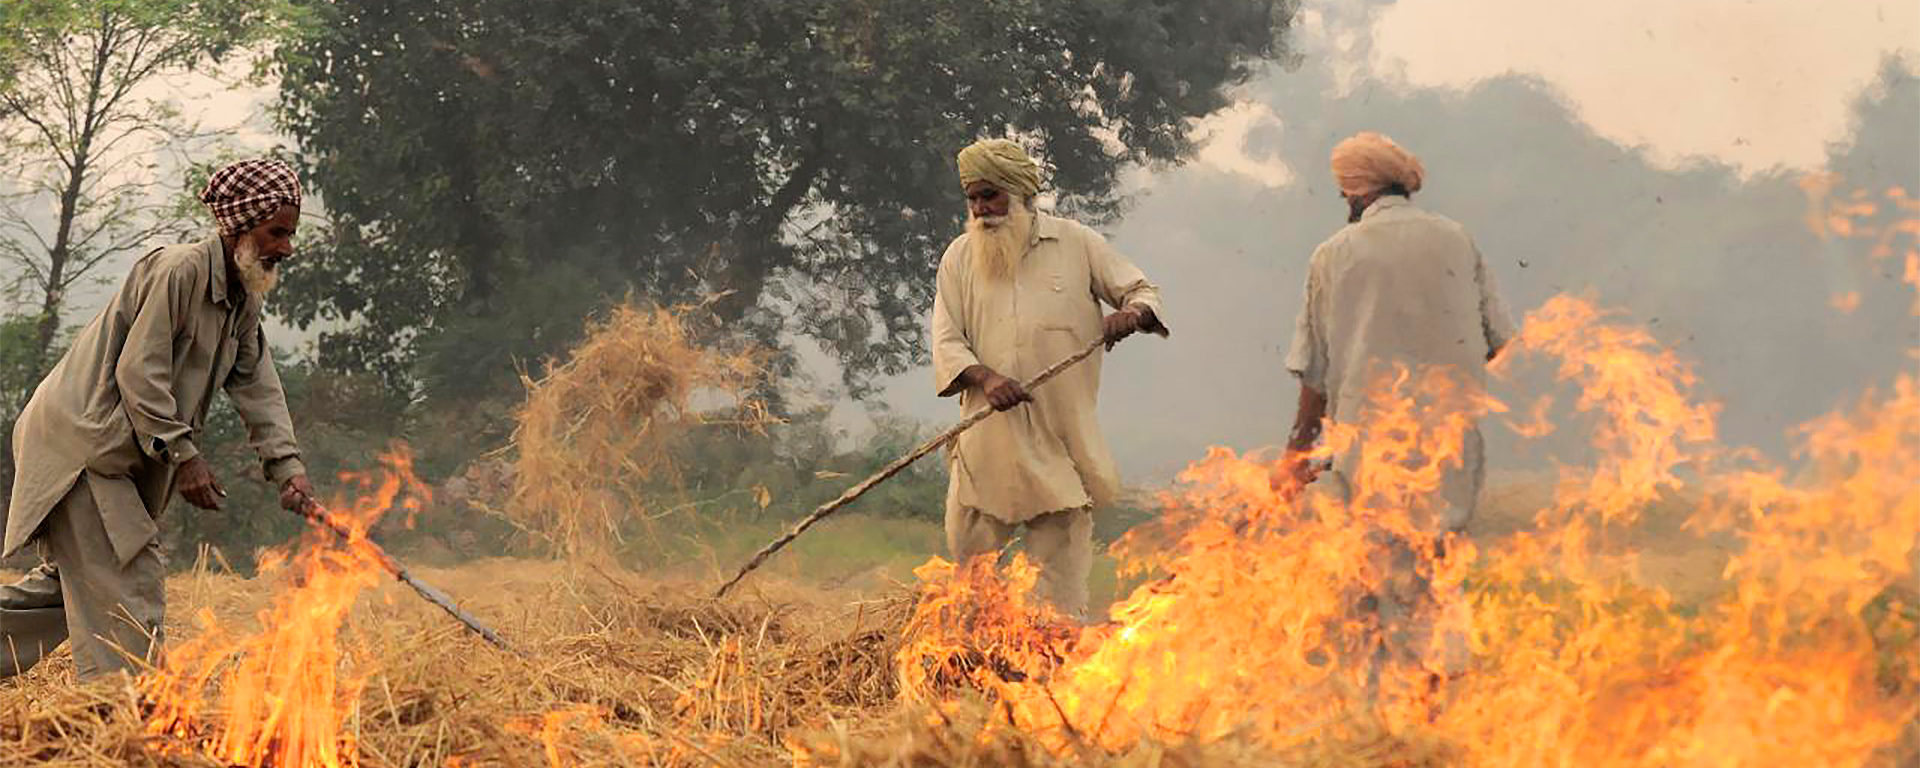 air pollution problem through stubble burning in Delhi India, Pic by Neil Palmer (CIAT)